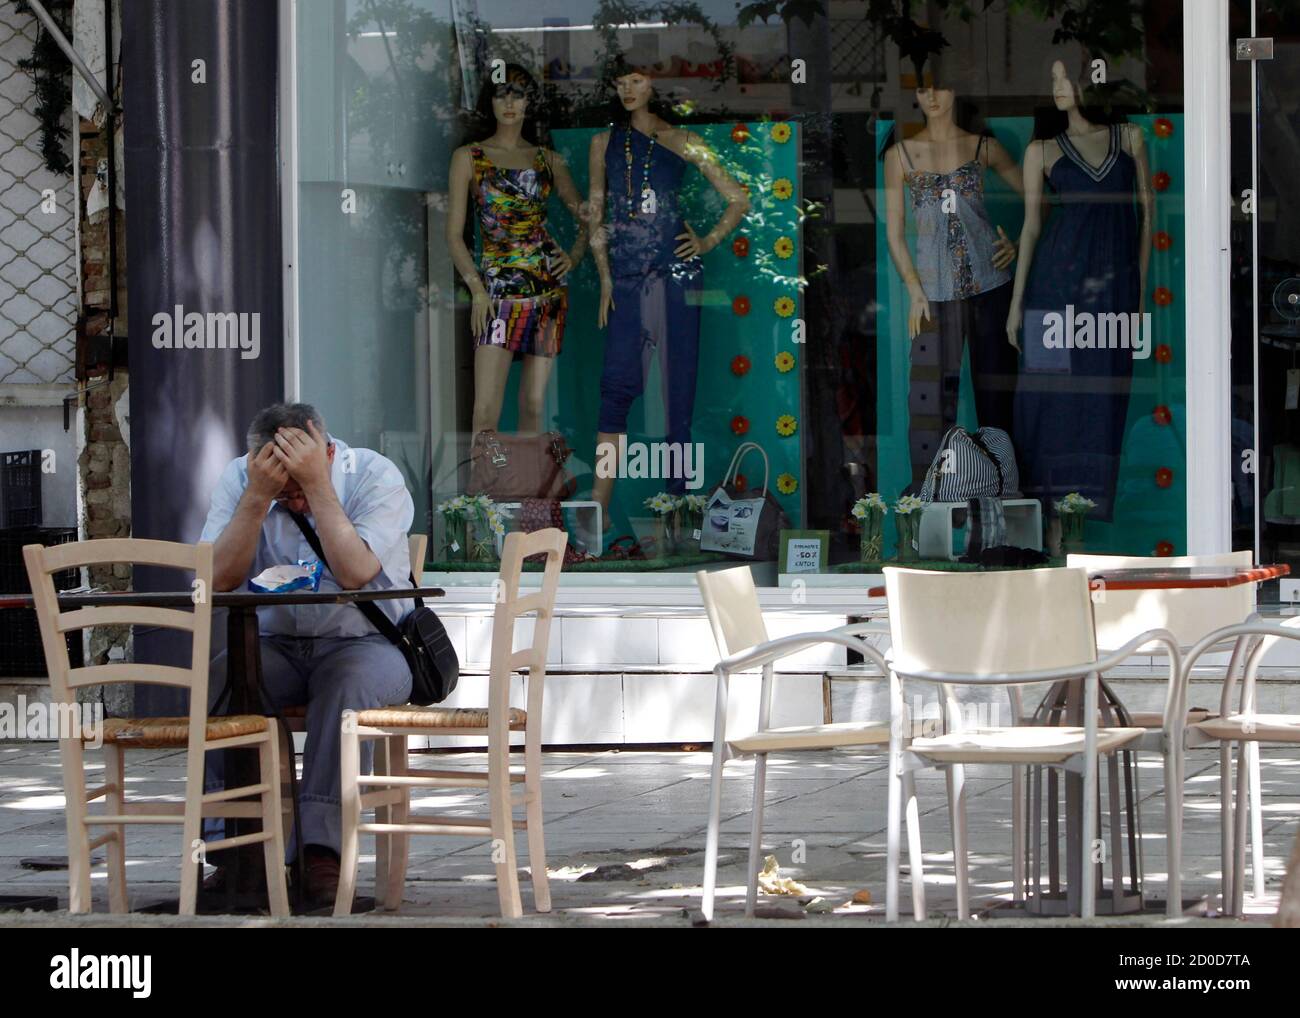 Page 4 - Greek Man In Cafe In High Resolution Stock Photography and Images  - Alamy